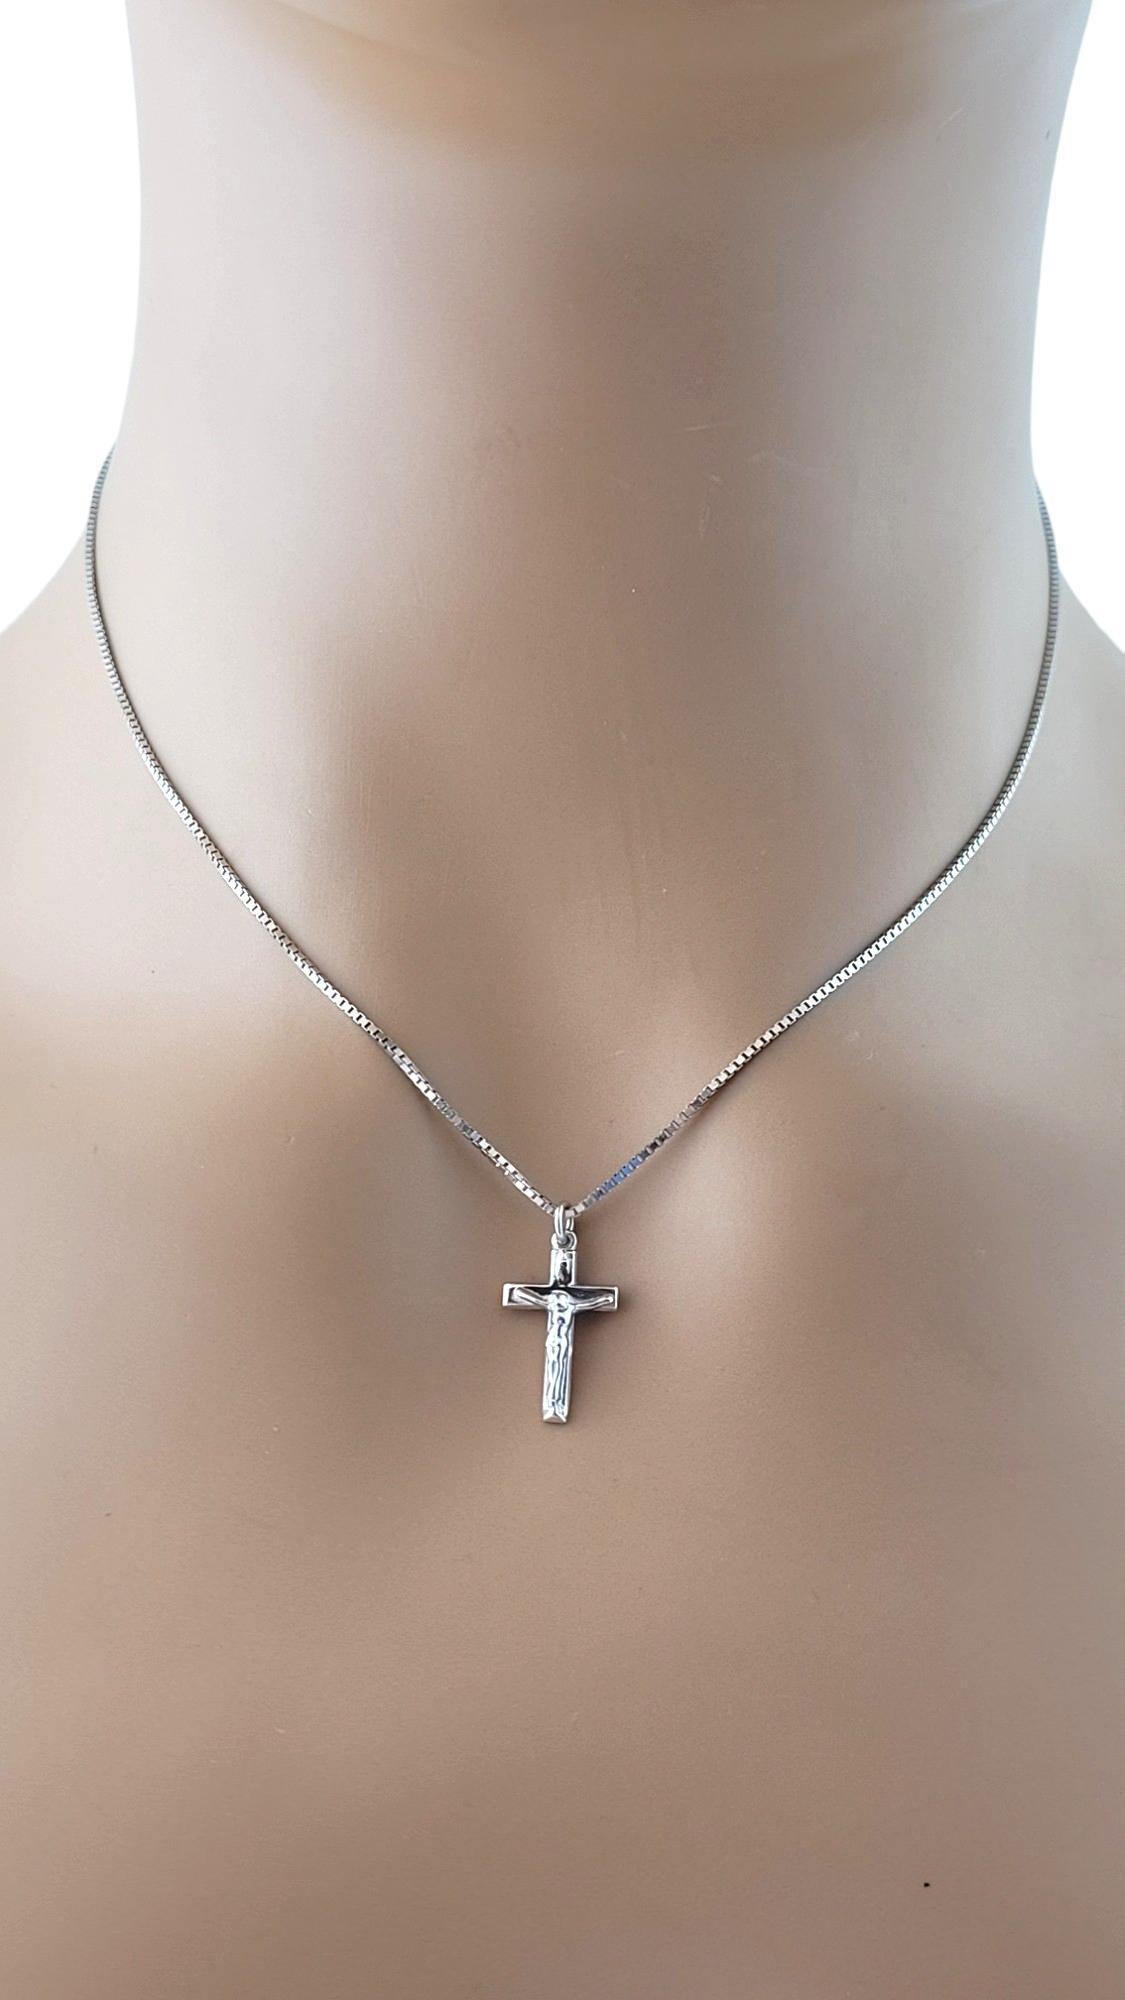 14K White Gold Cross Pendant Chain Necklace #16466 For Sale 4